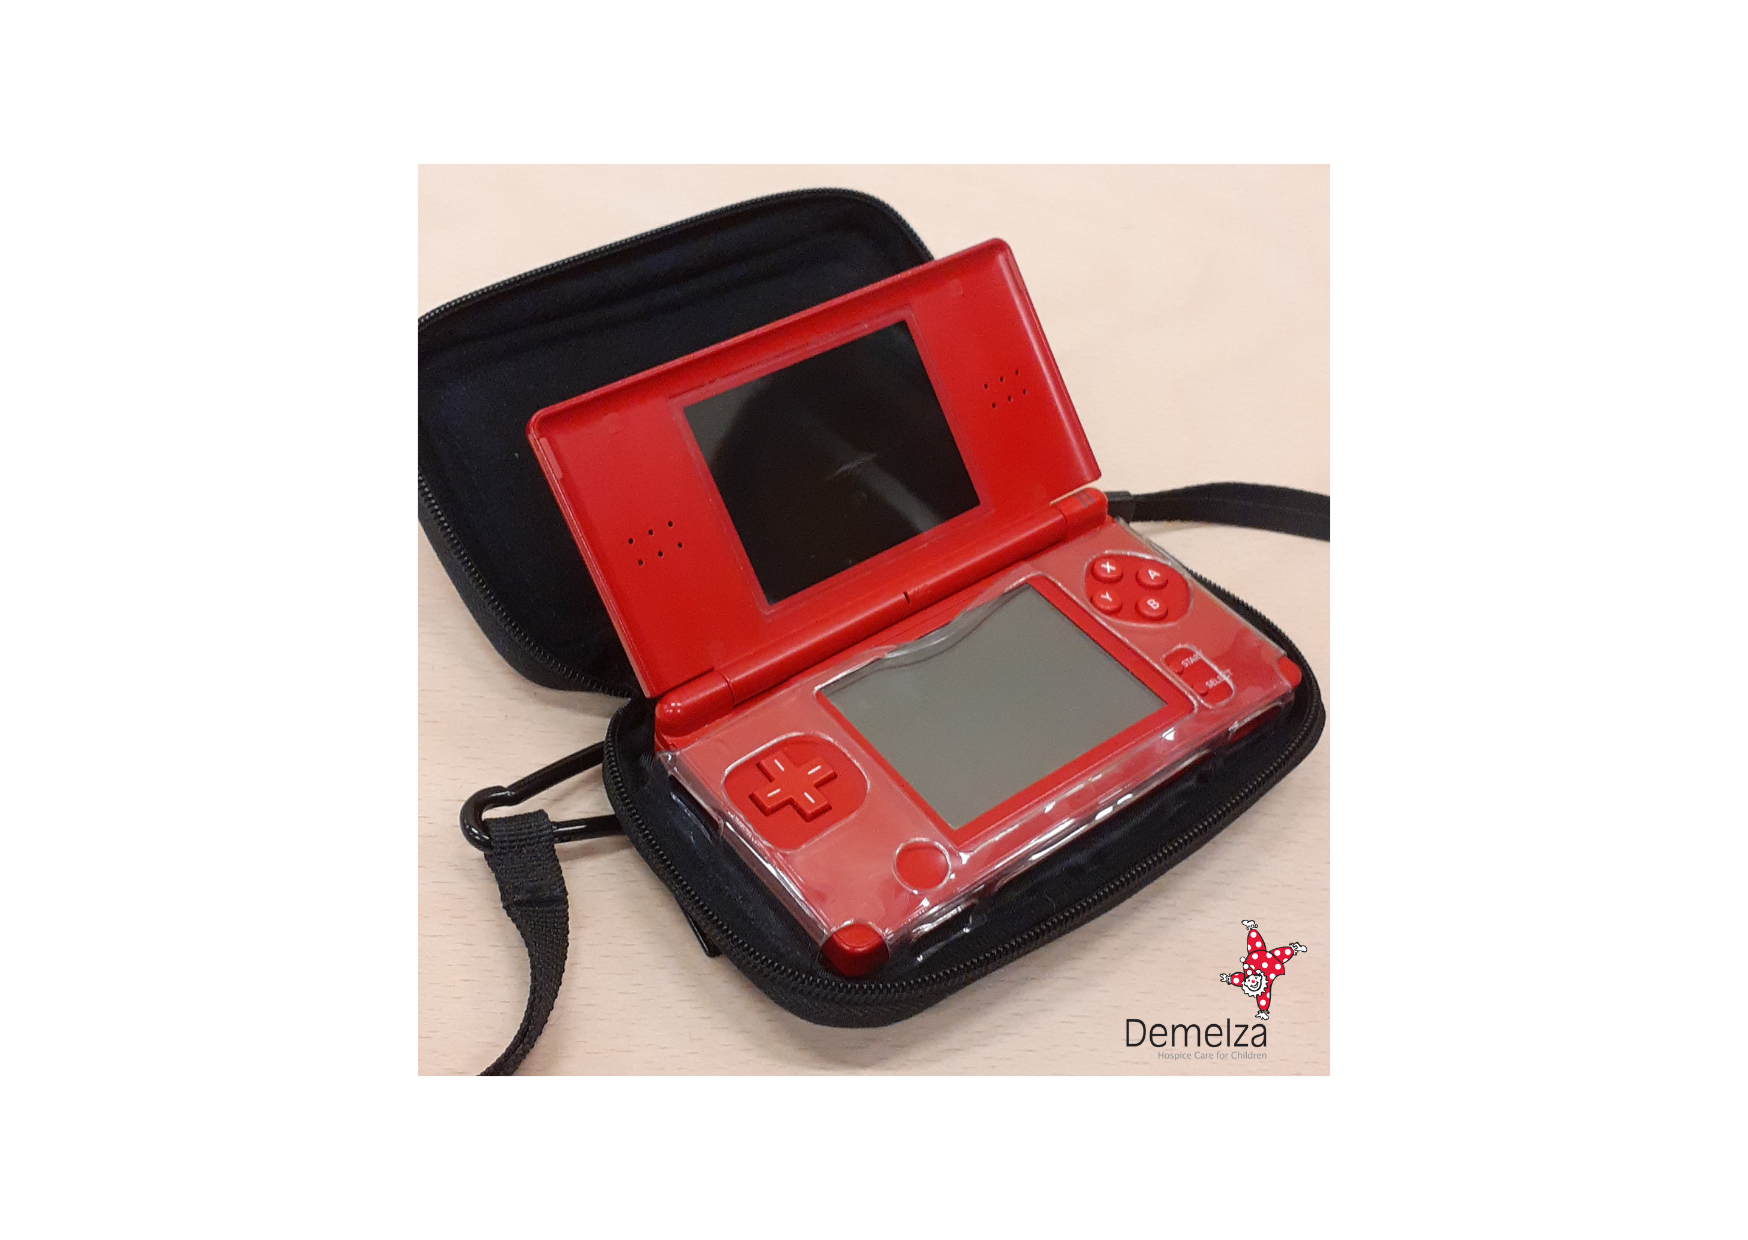 Red Nintendo DS Lite with black zip up carry case